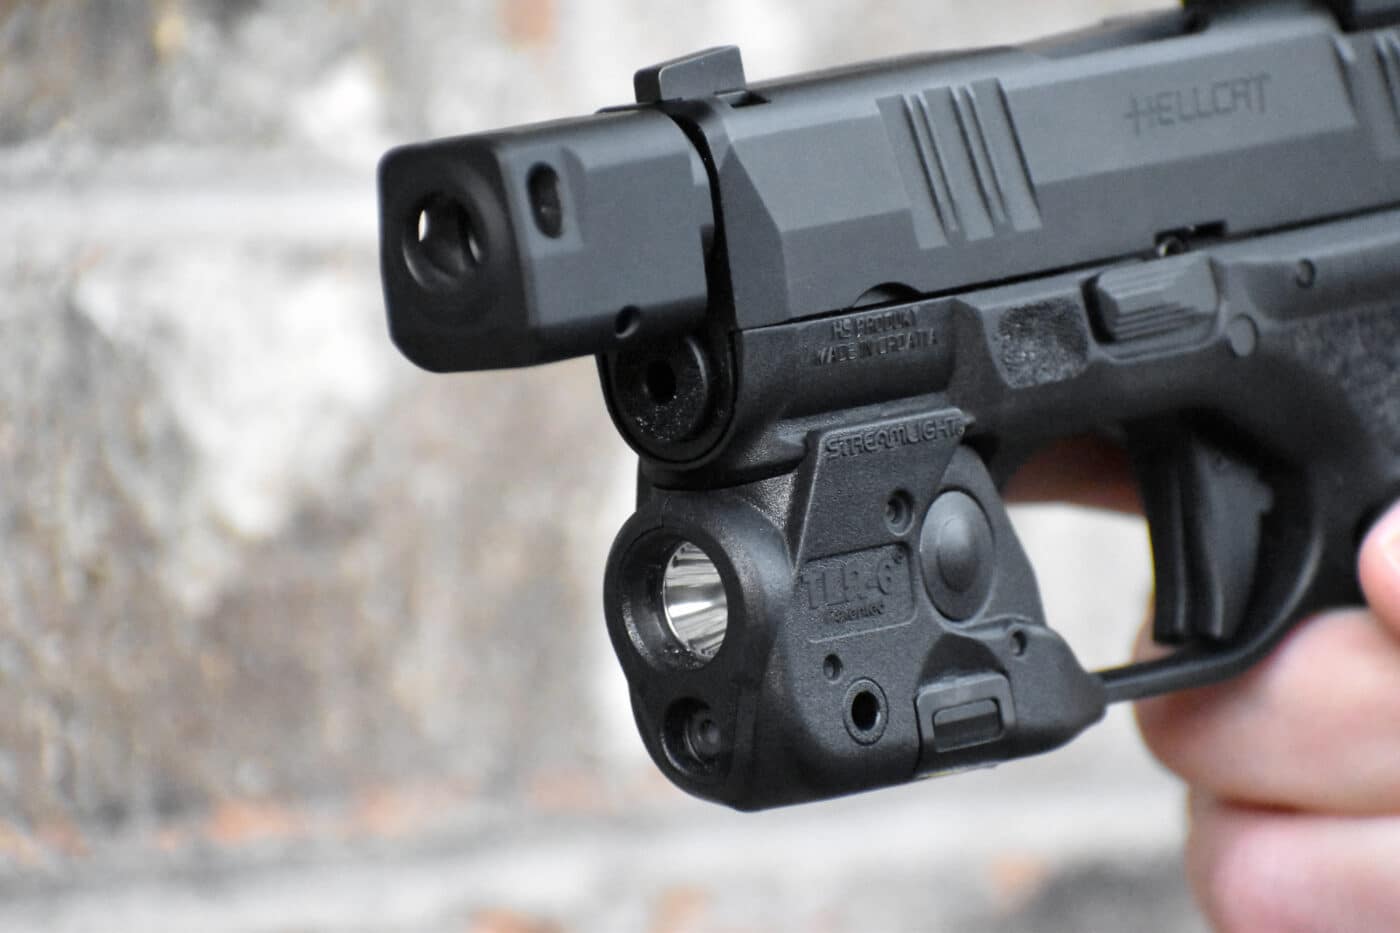 Streamlight TLR-6 mounted on a Springfield Armory Hellcat pistol